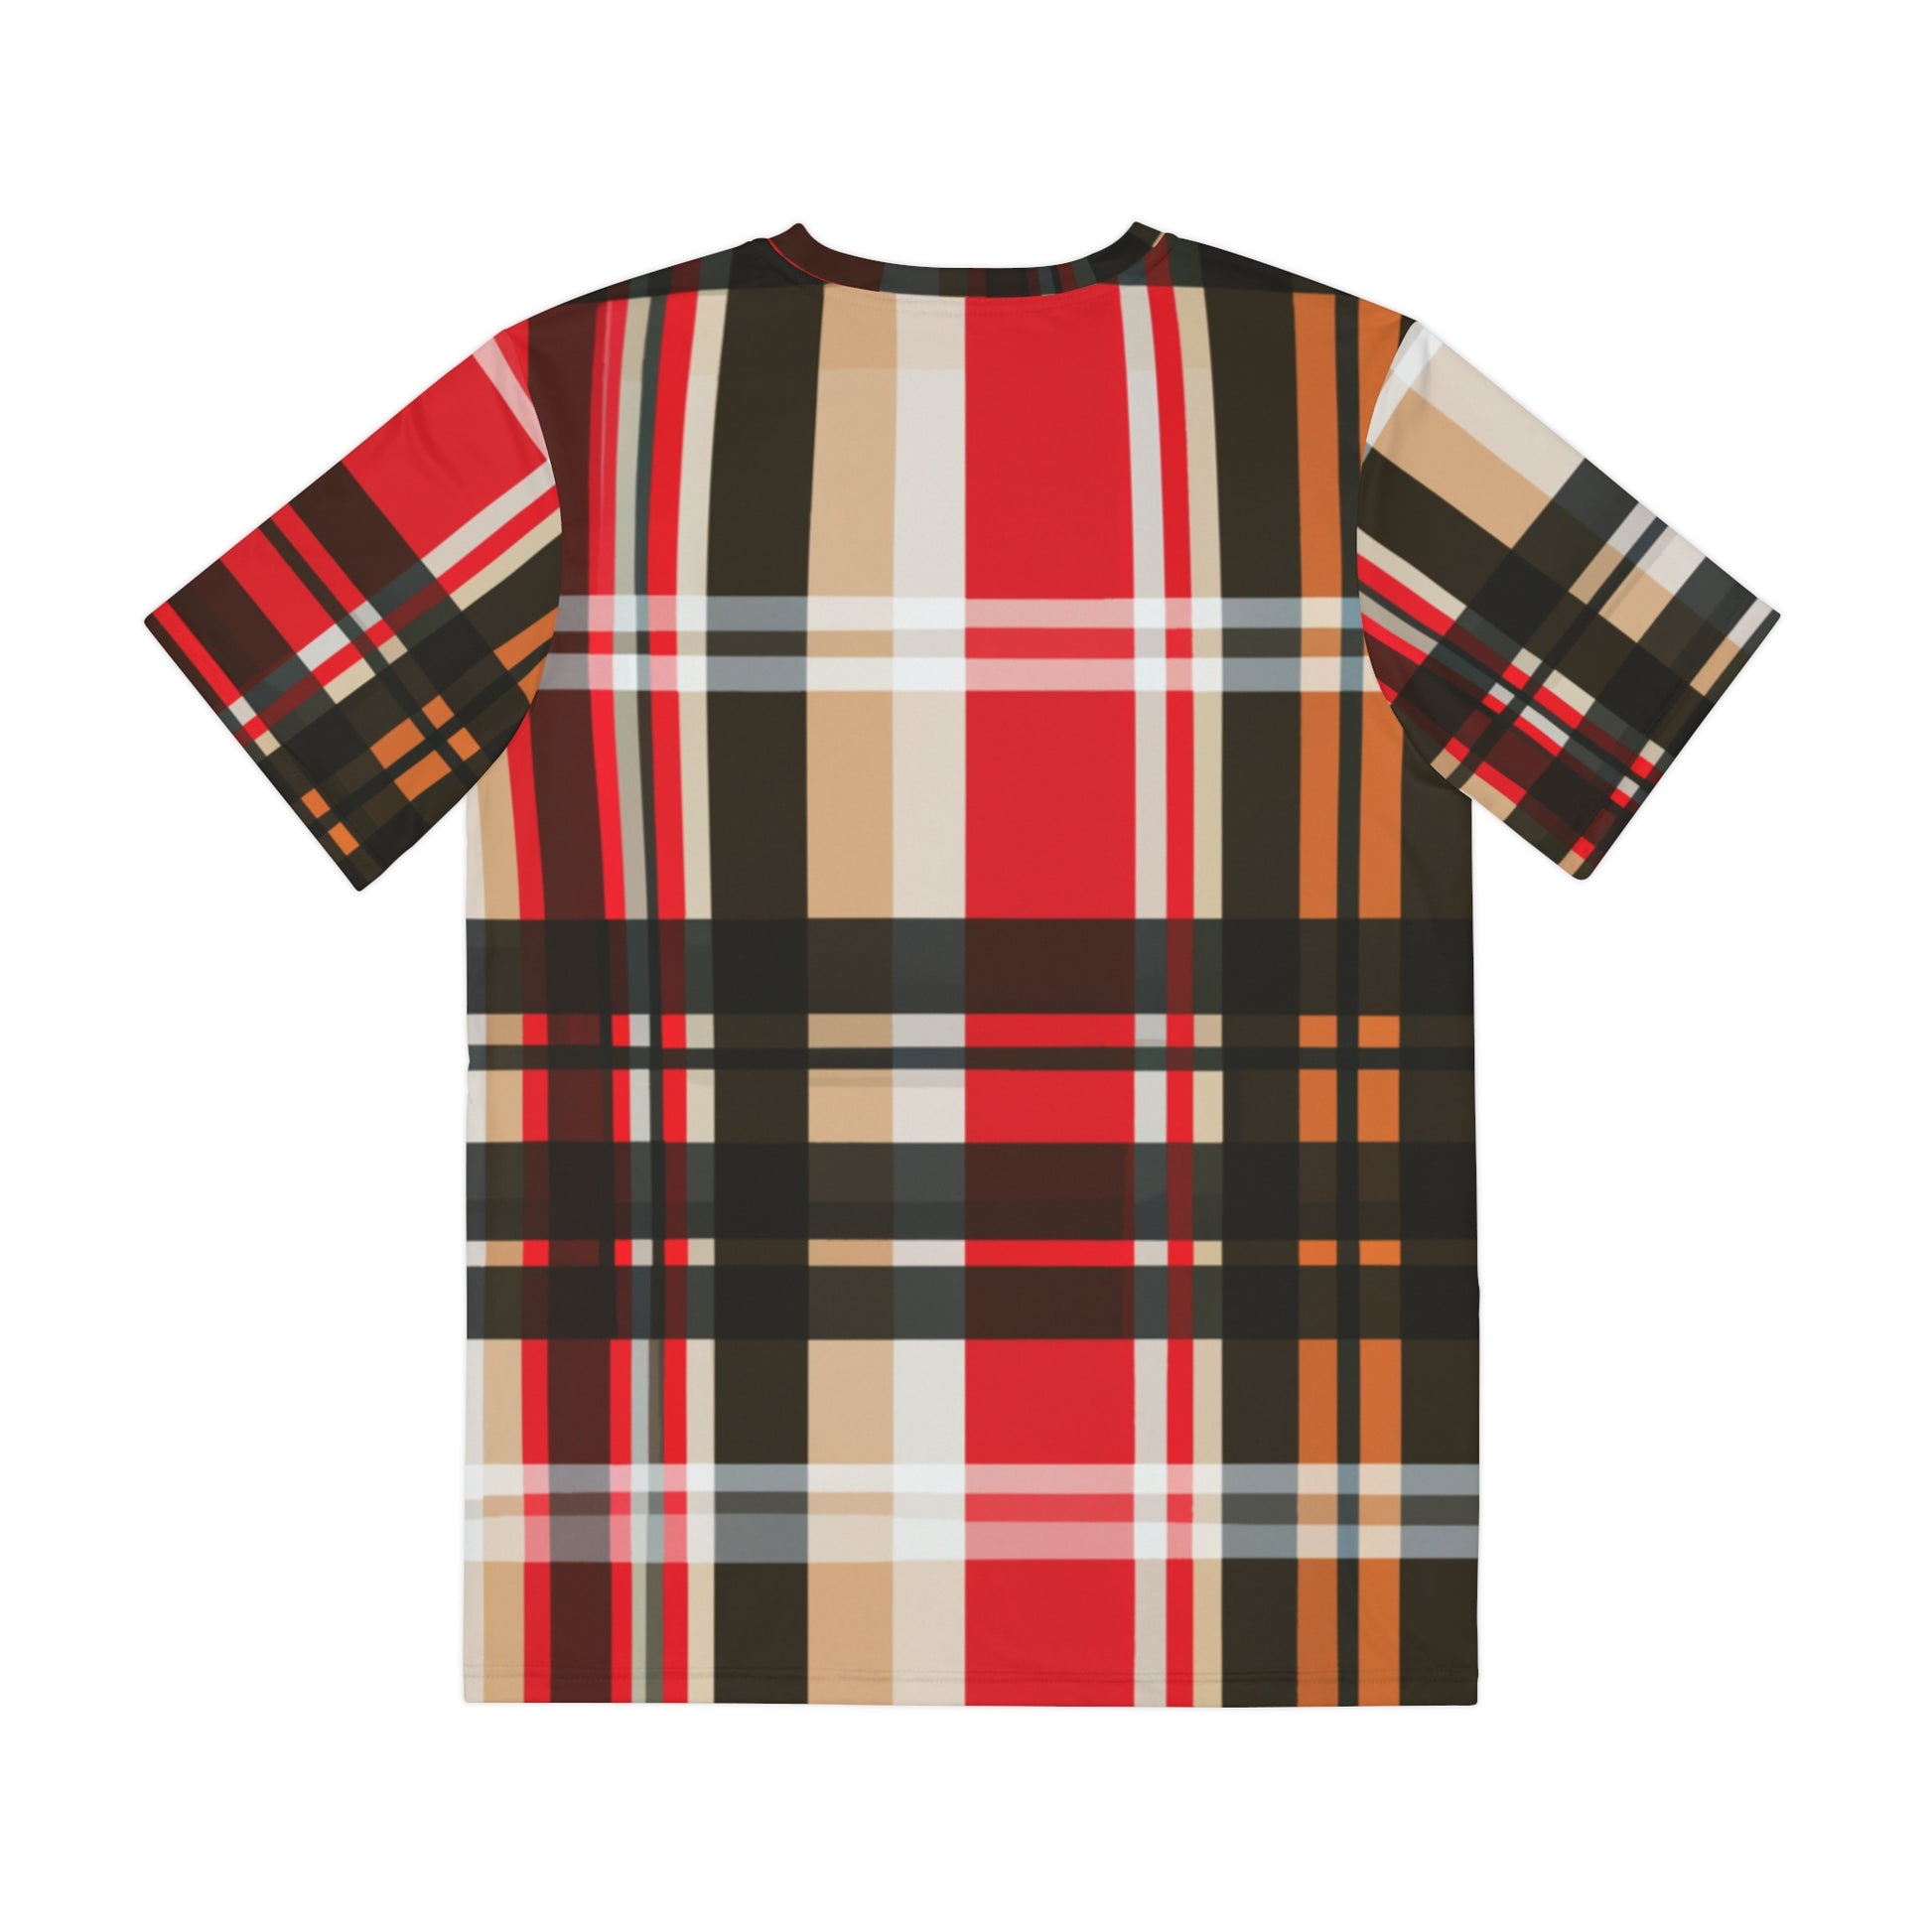 Back view of the Glasgow Plaid Crewneck Pullover All-Over Print Short-Sleeved Shirt red black white yellow mustard plaid pattern 